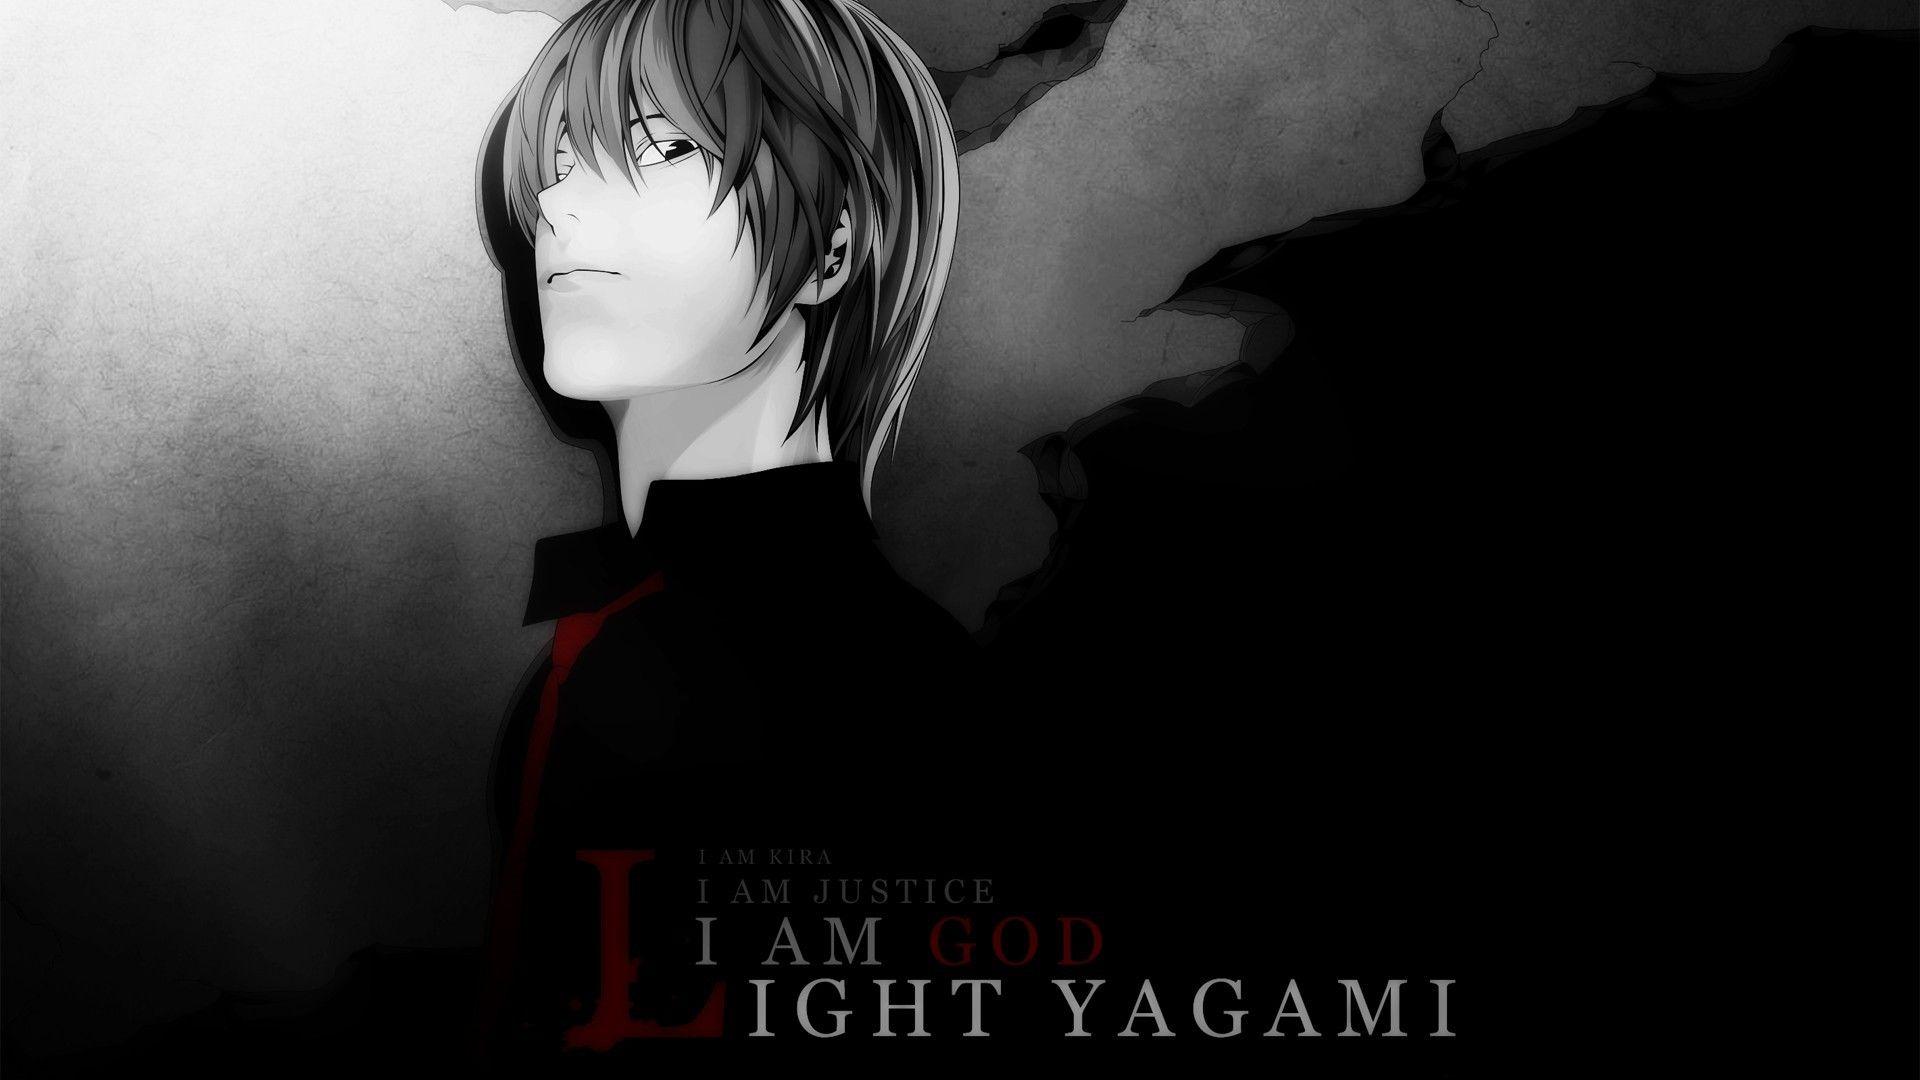 Light Yagami from Death Note Anime Wallpaper Full HD